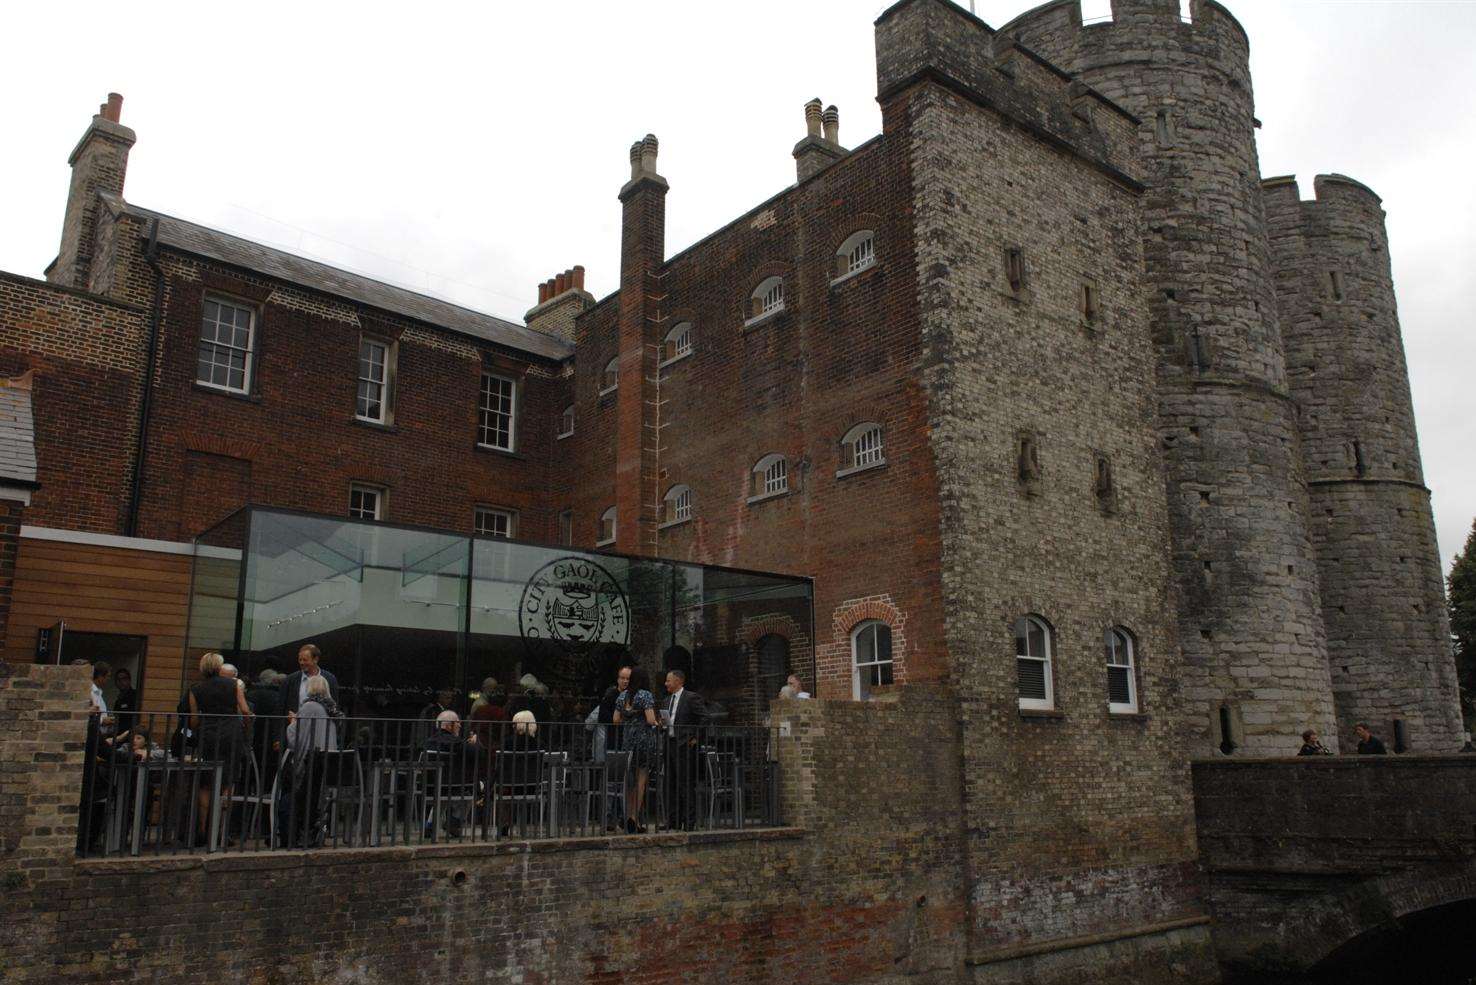 The City Gaol Cafe and Westgate Towers museum when it was in use